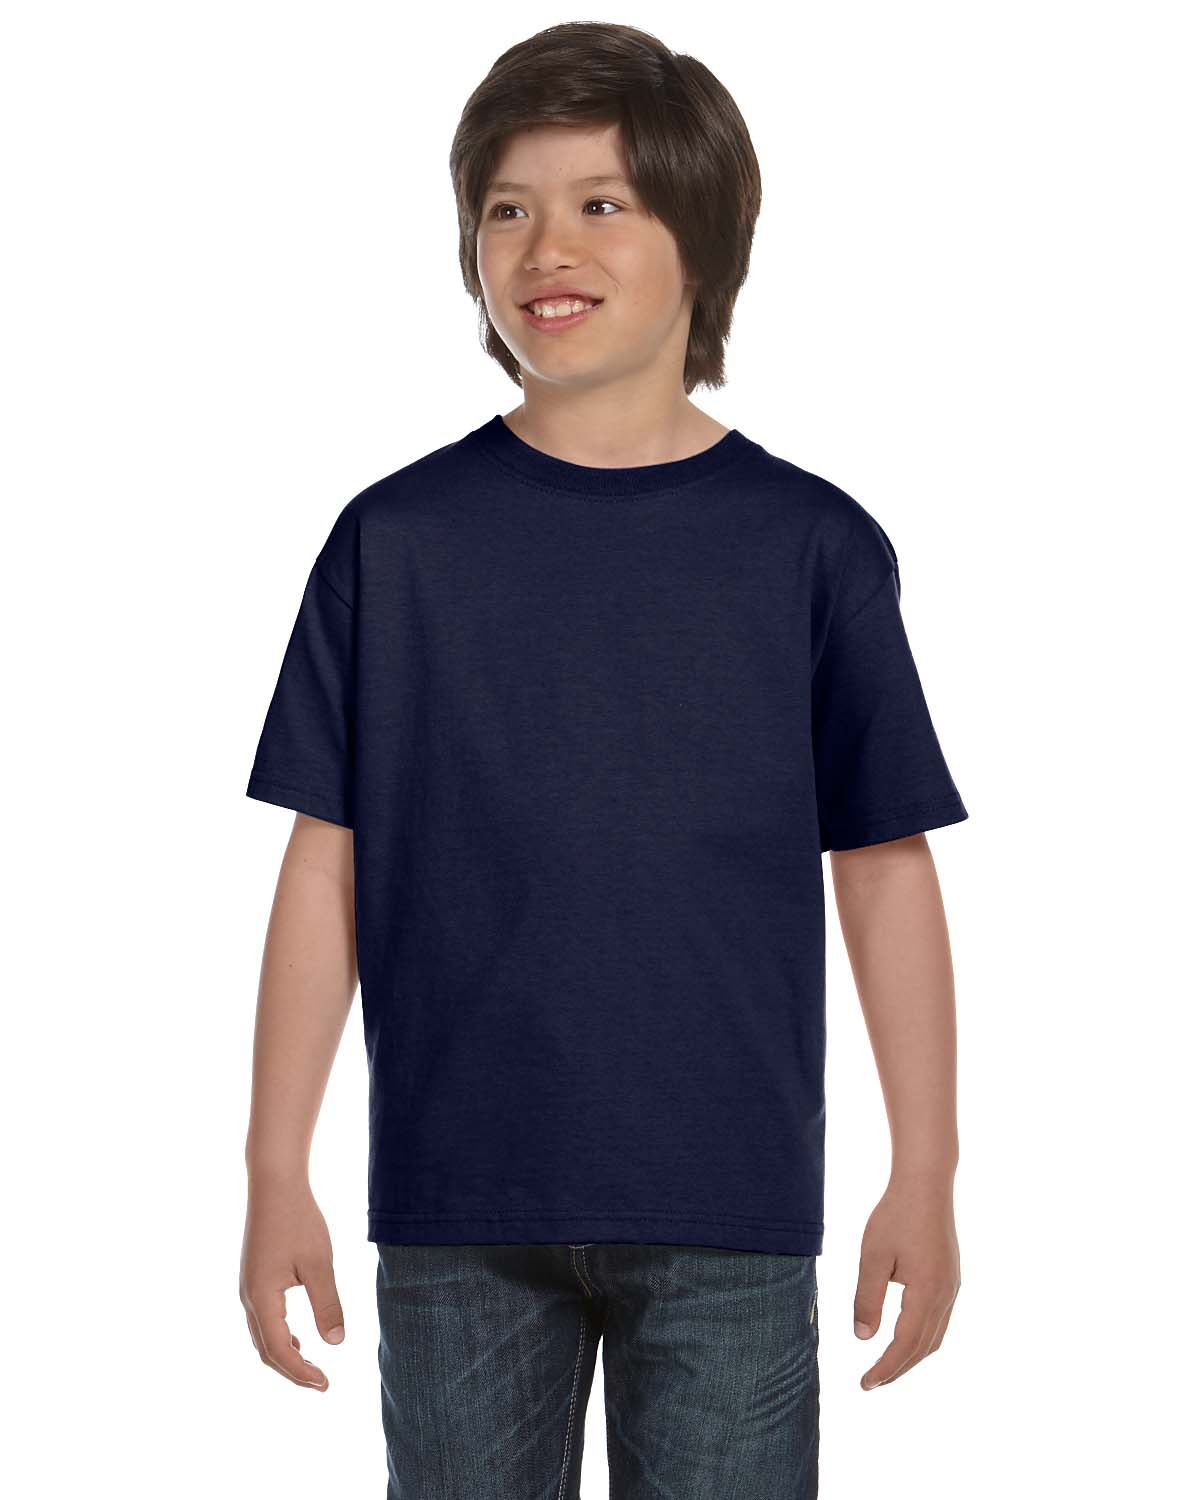 Hanes Youth Tee with logo option